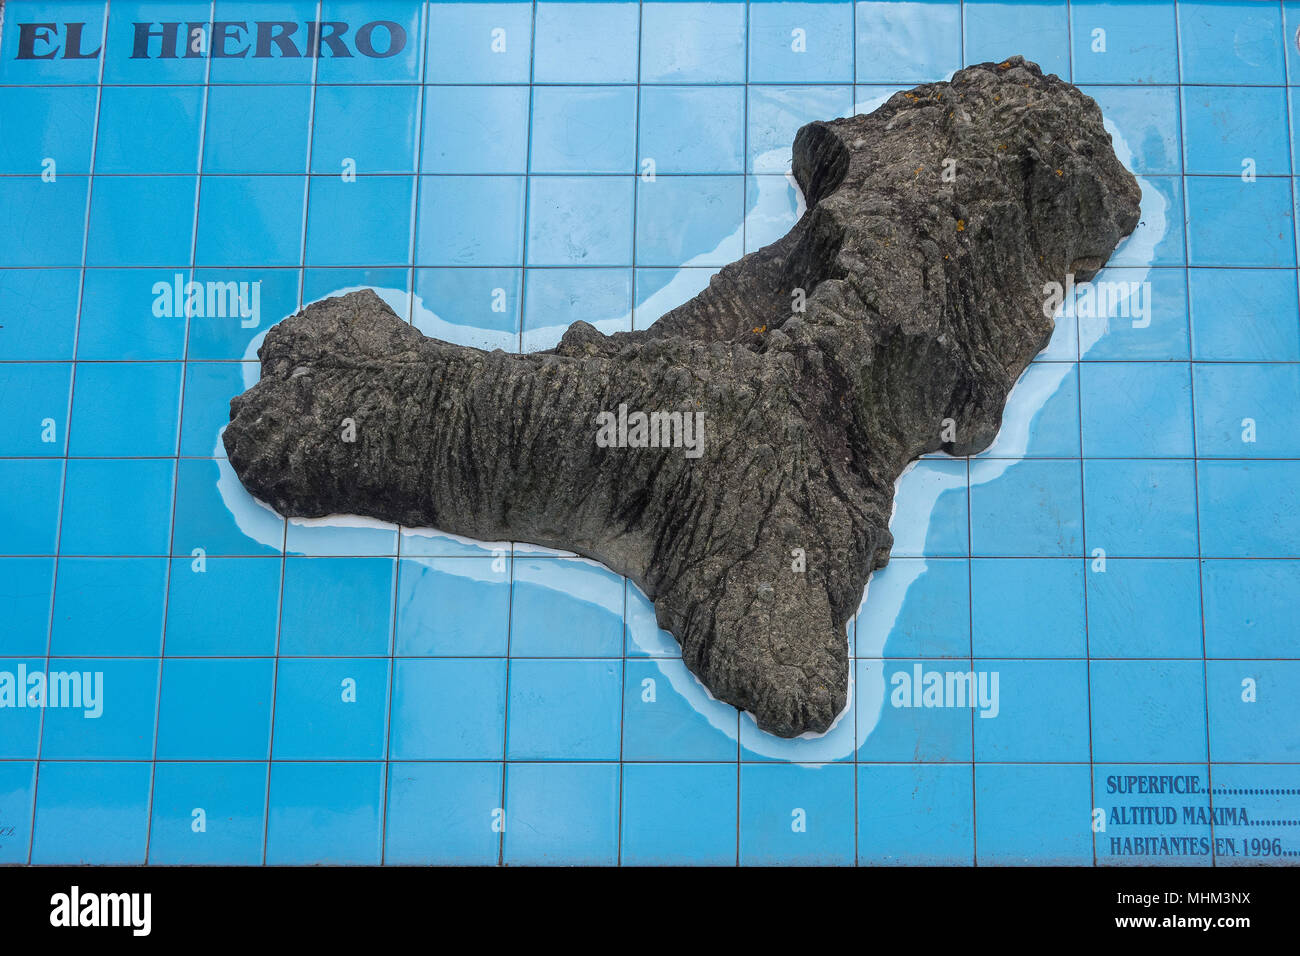 Spain, Grand Canary, Firgas. model of El Hierro island Stock Photo